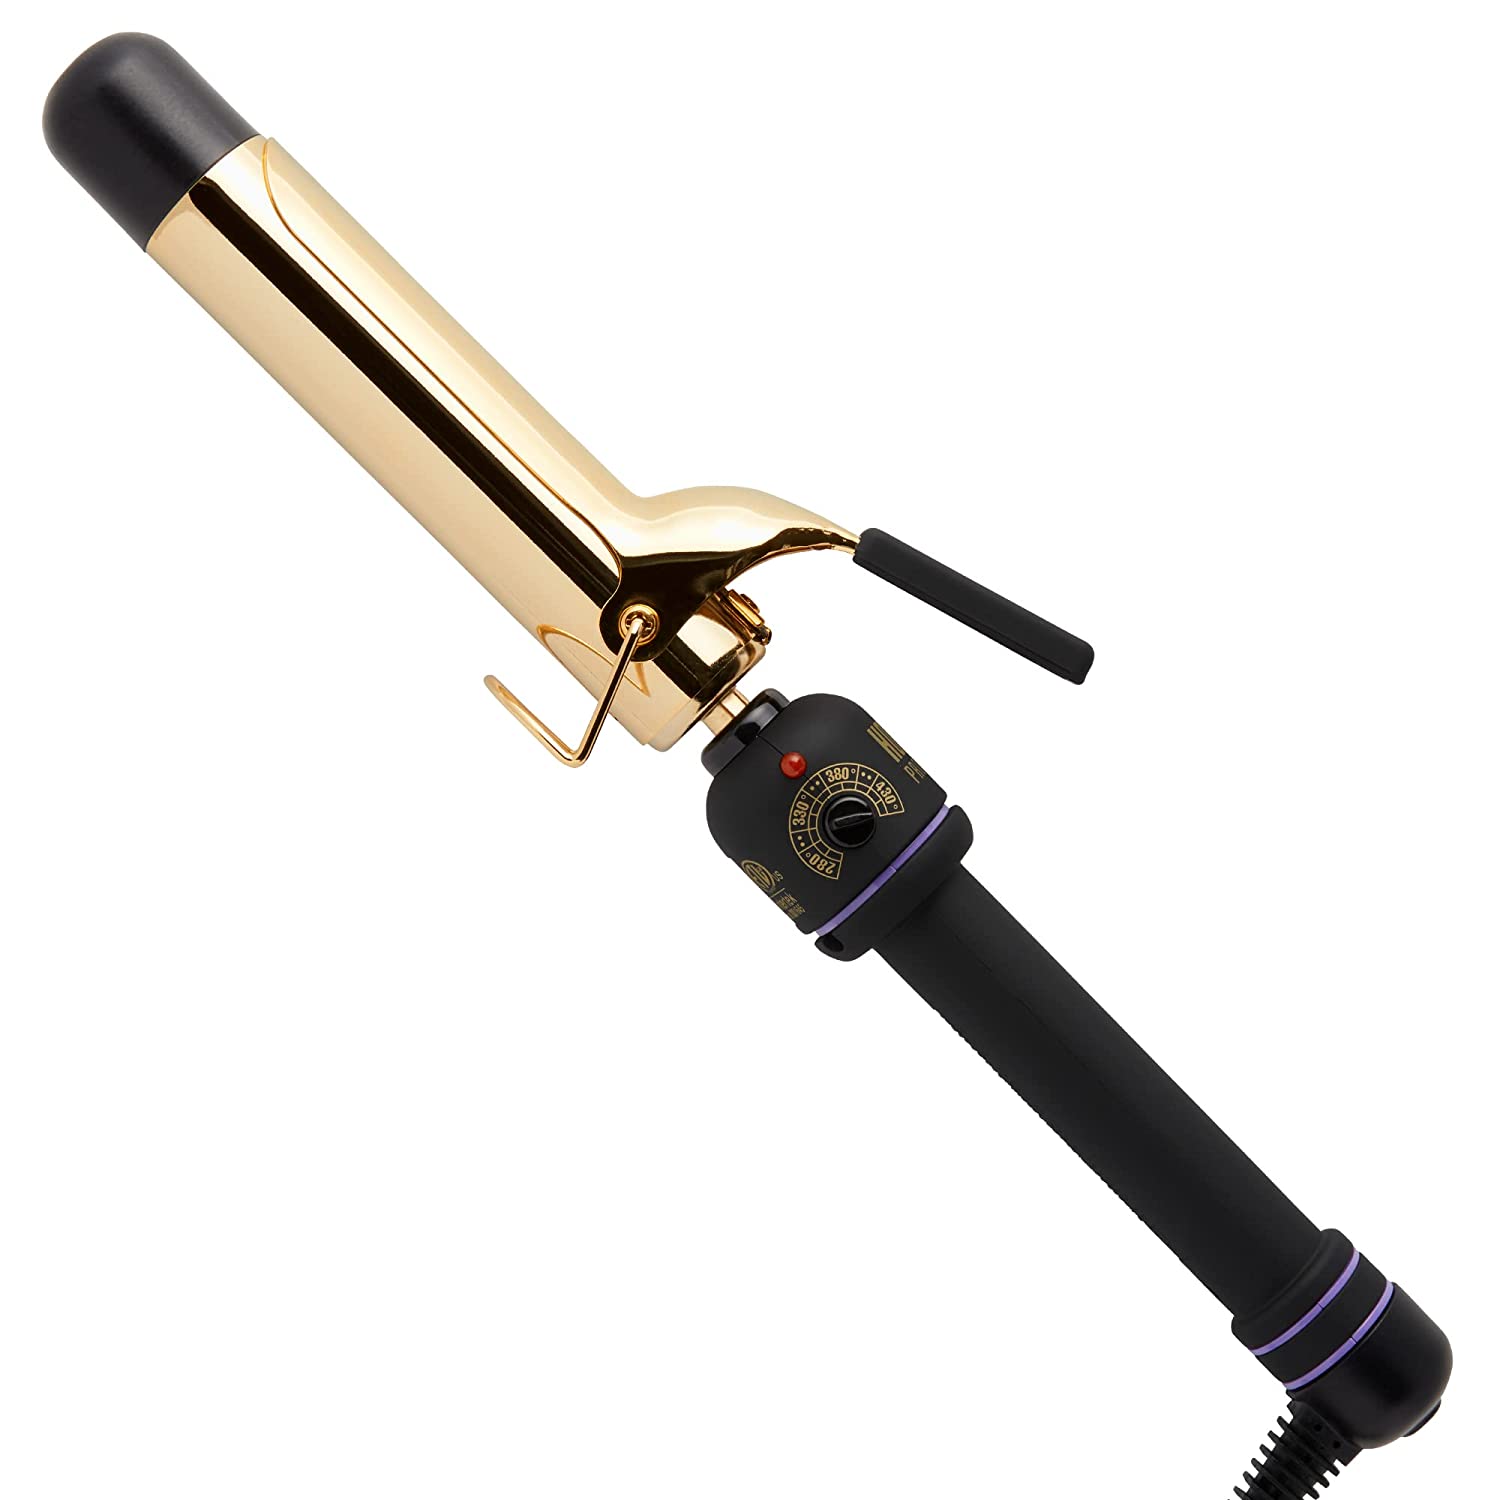 Hot Tools Professional 24K Gold Curling Iron - The Best Hair Styling Tools